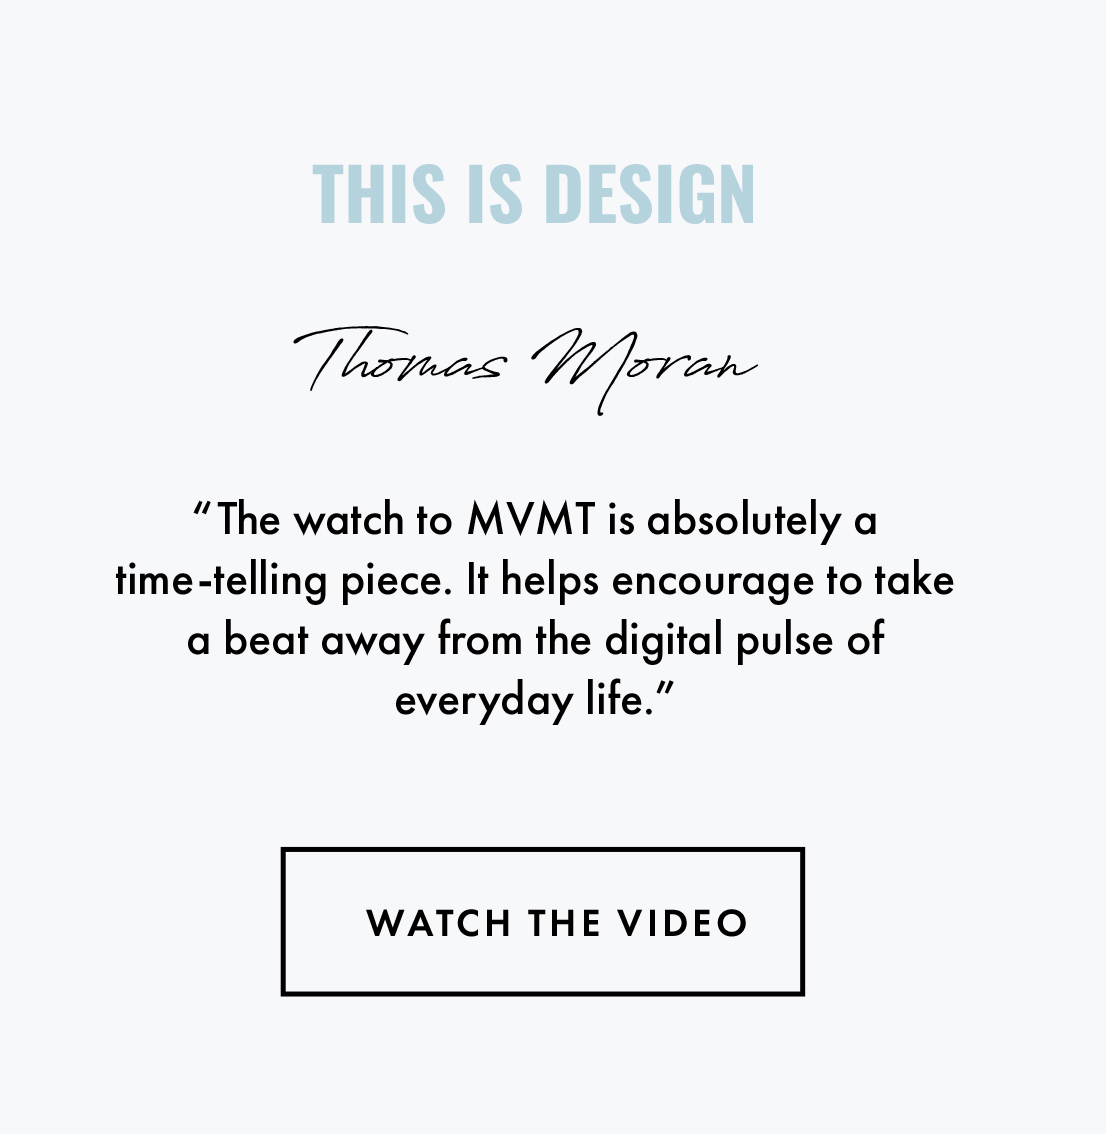 This is Design Thomas Moran. "The watch to MVMT is aboslutely a time-telling piece. It helps encourage to take a beat away from the digital pulse of everyday life." Watch the video